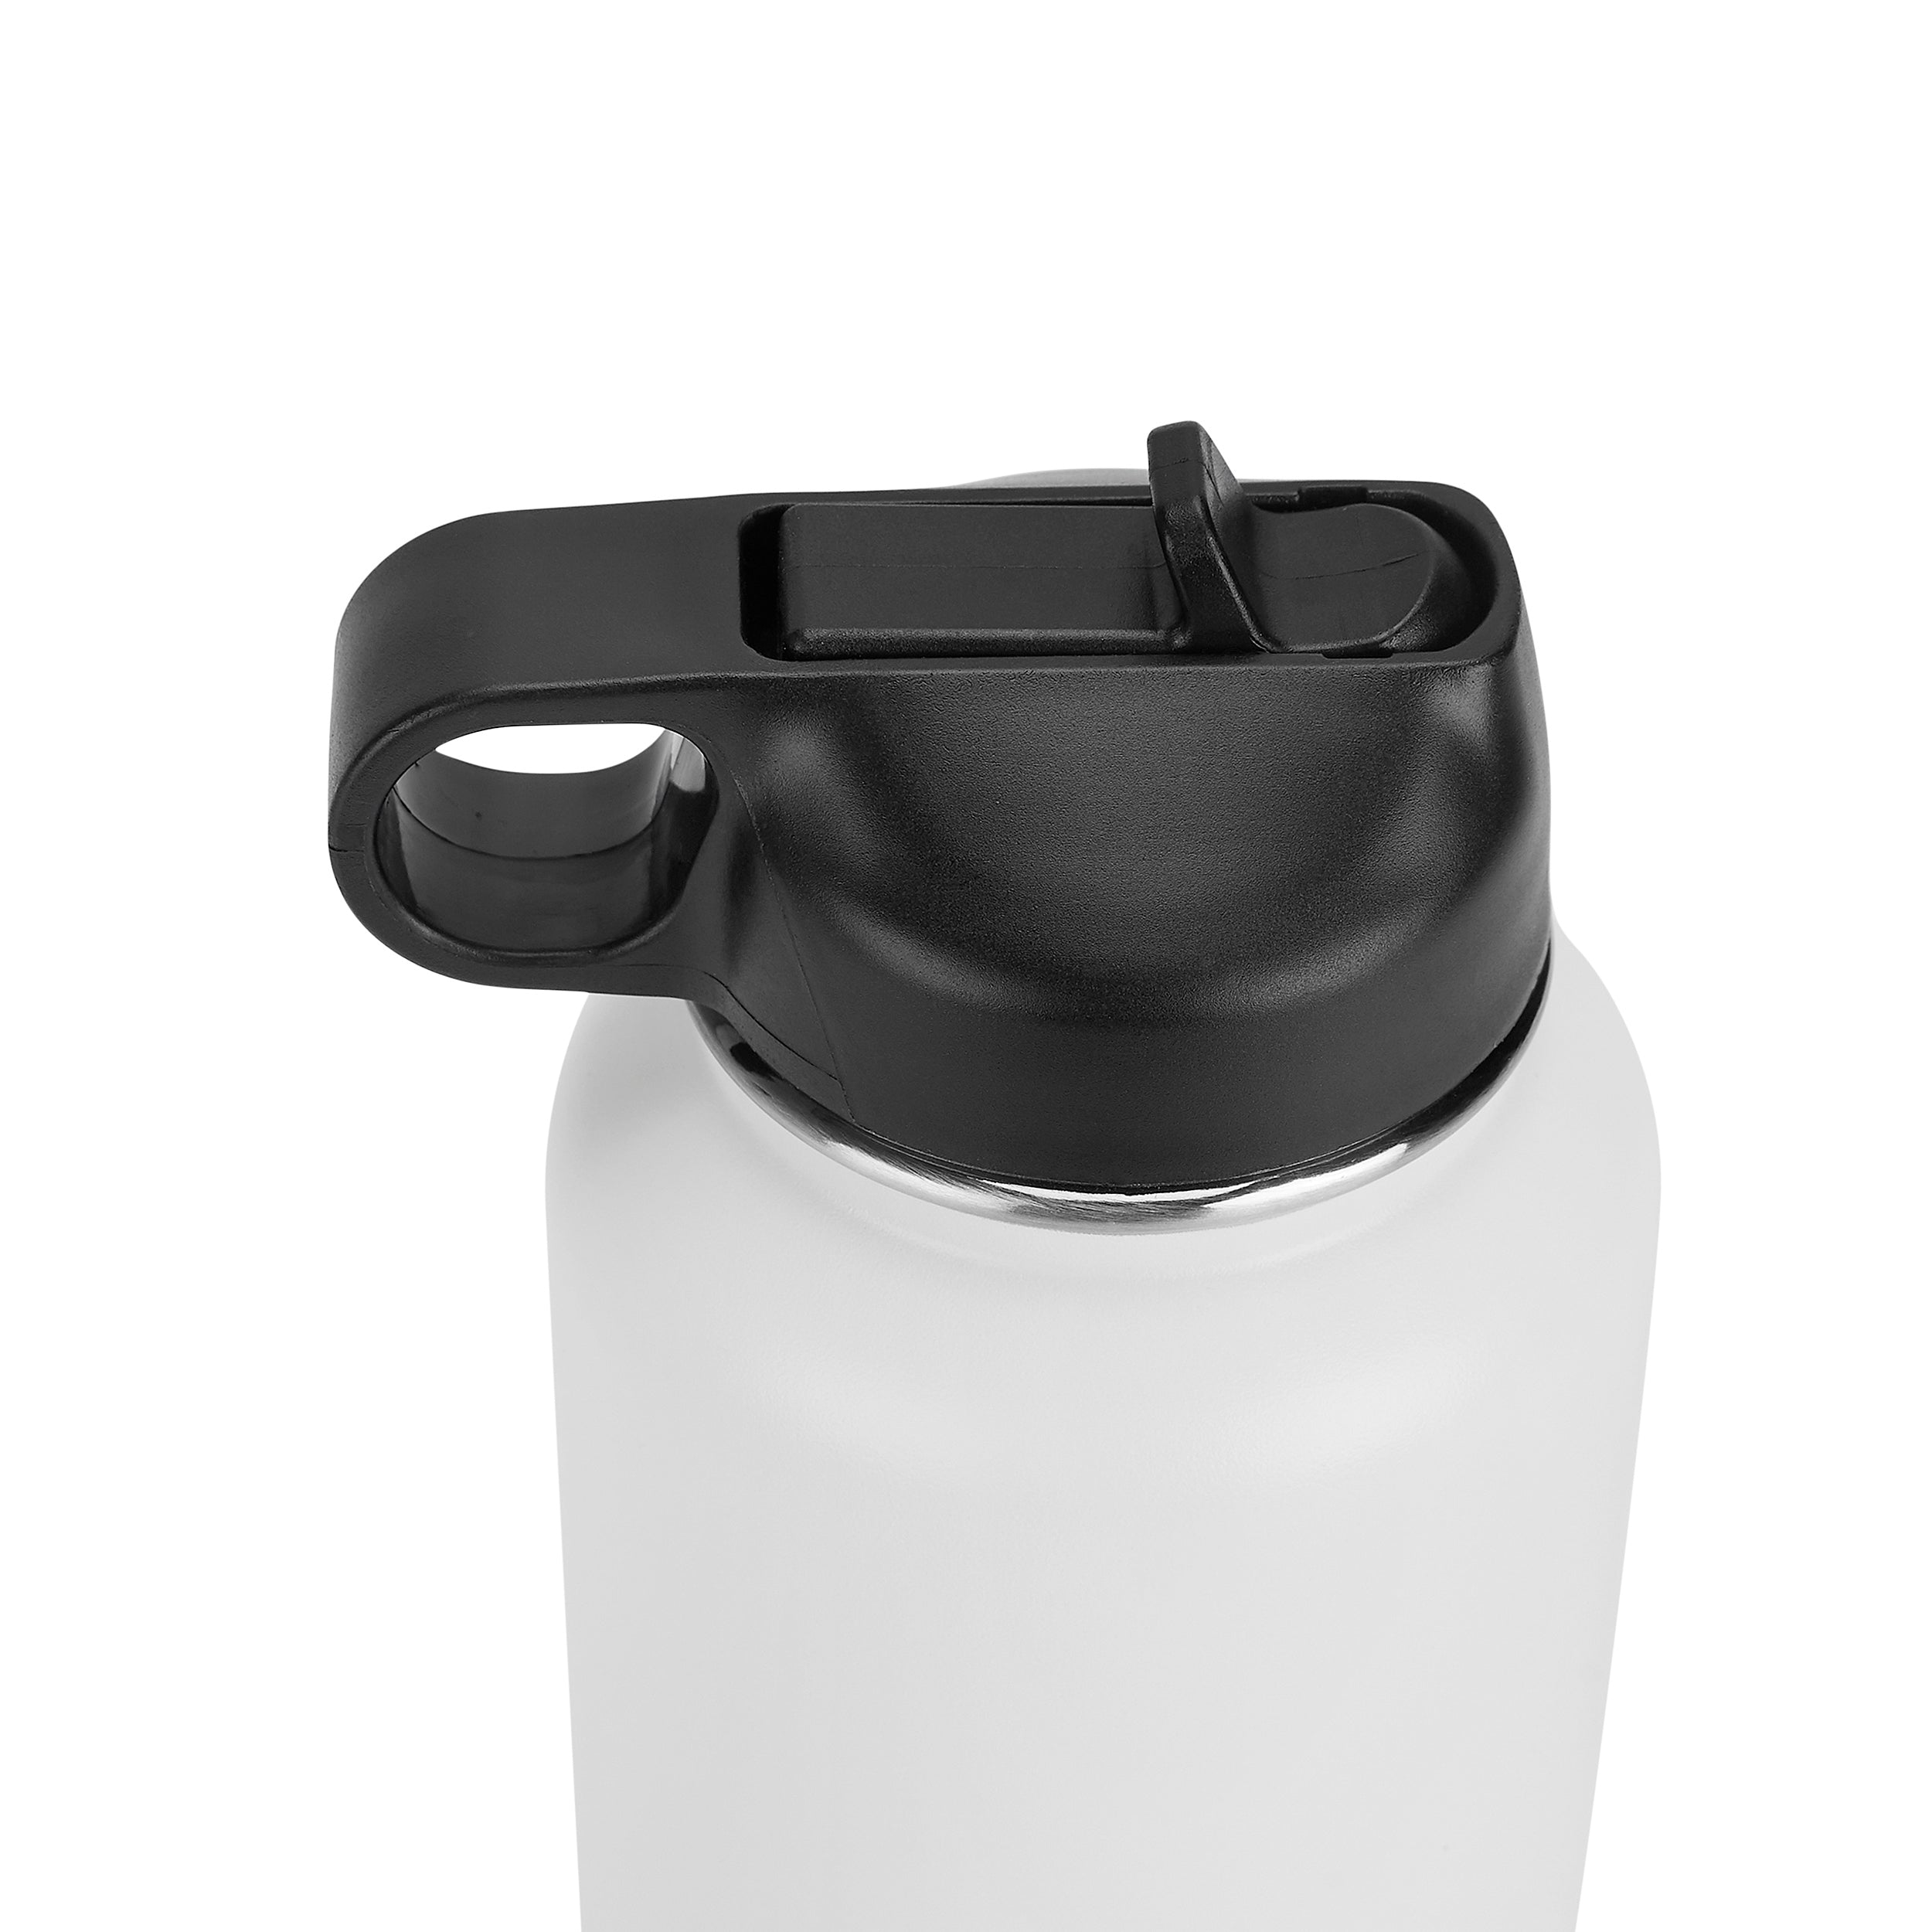 32oz Hydro Water Bottle for Witty